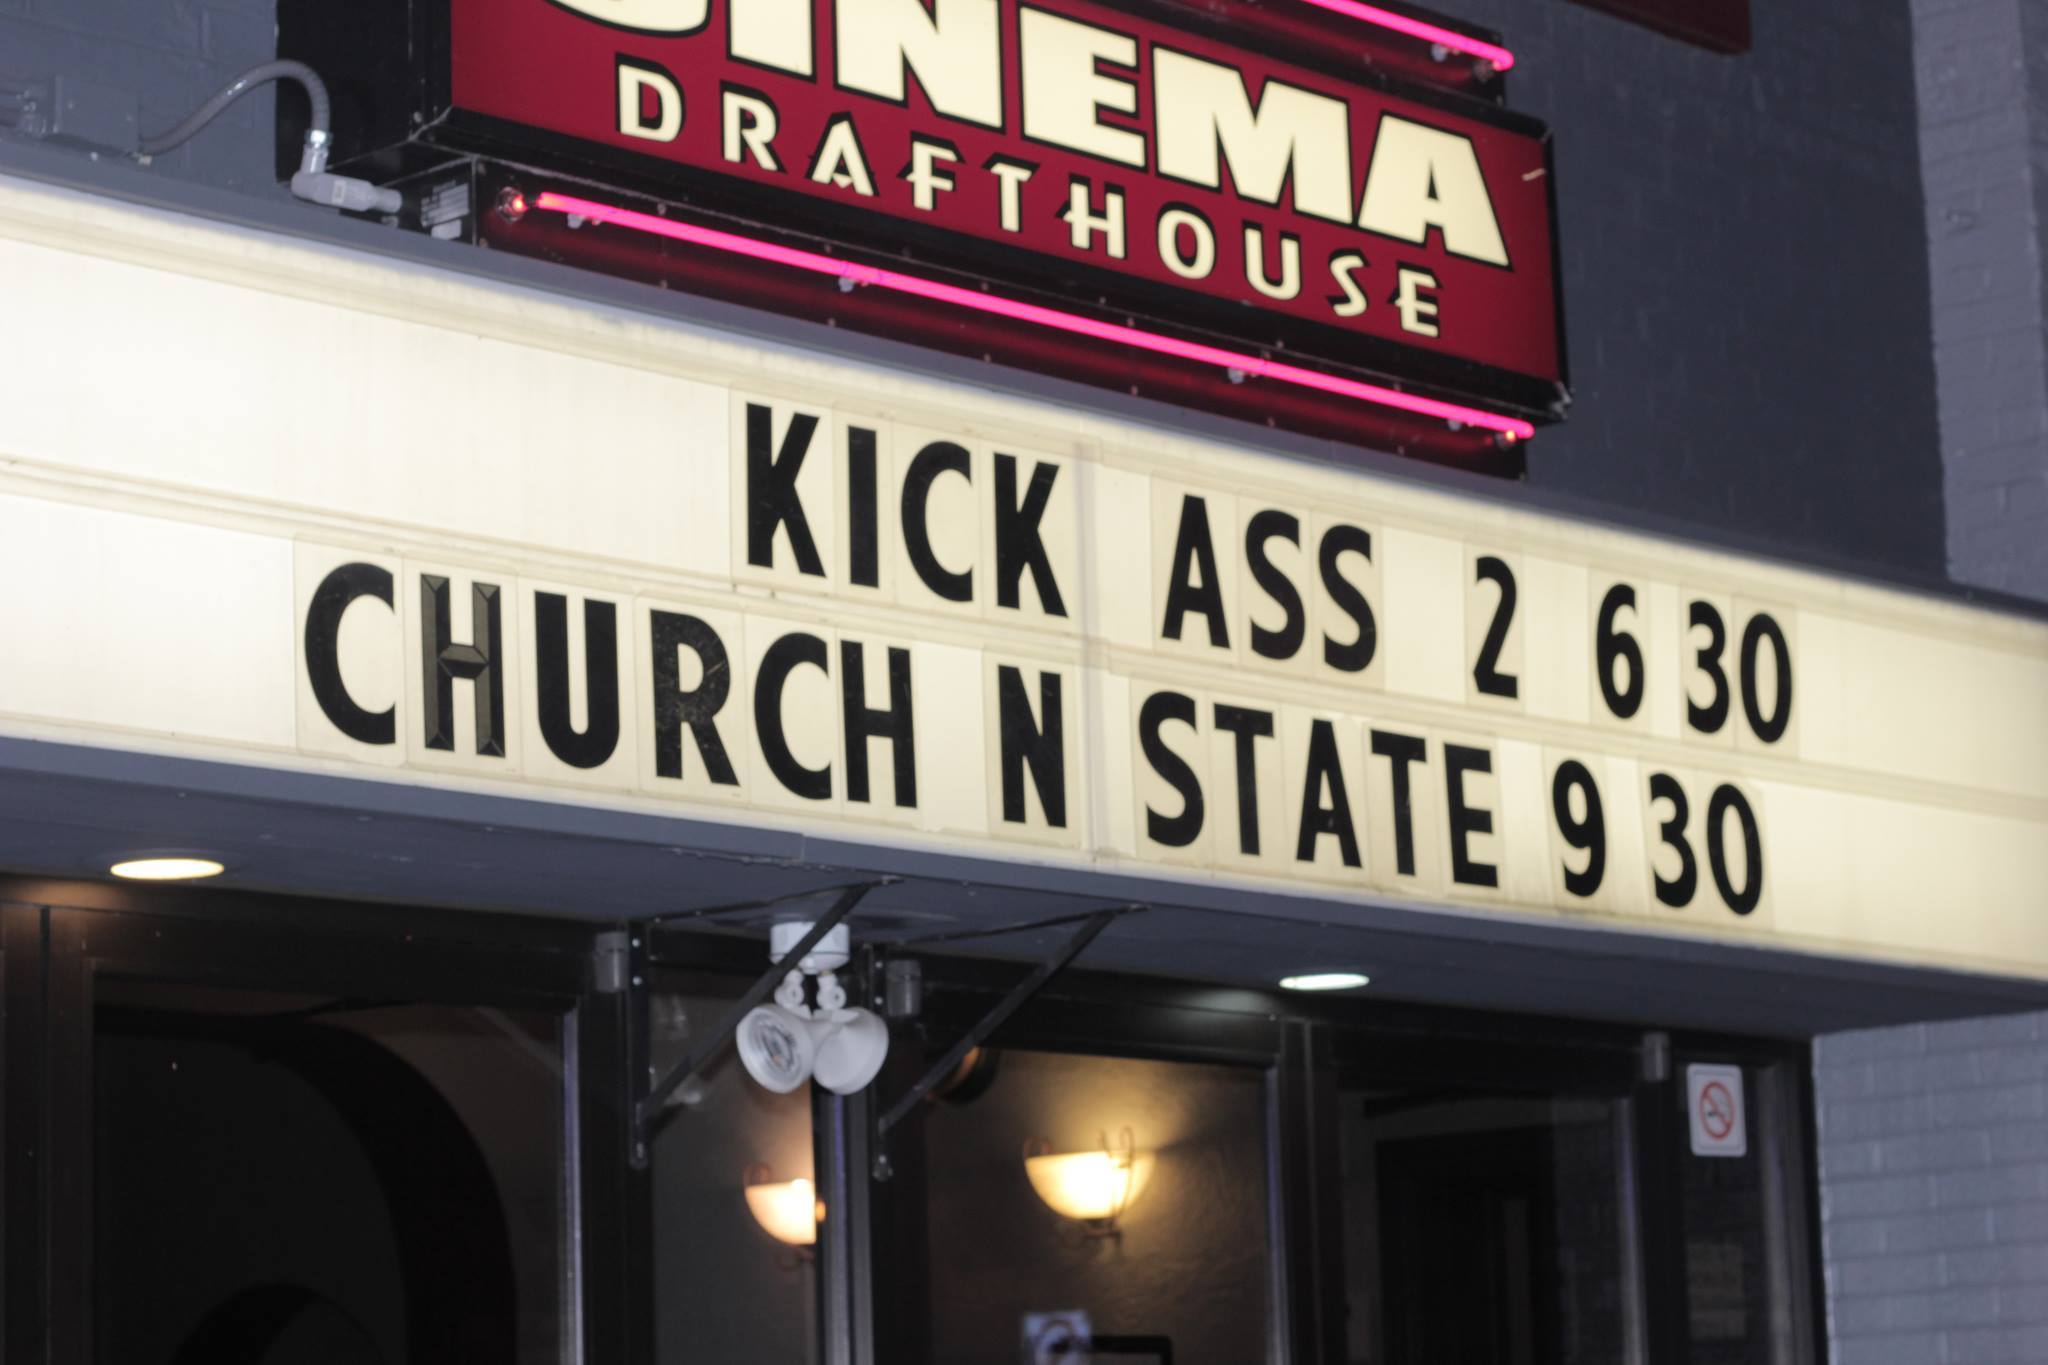 From screening of the film Church N' State